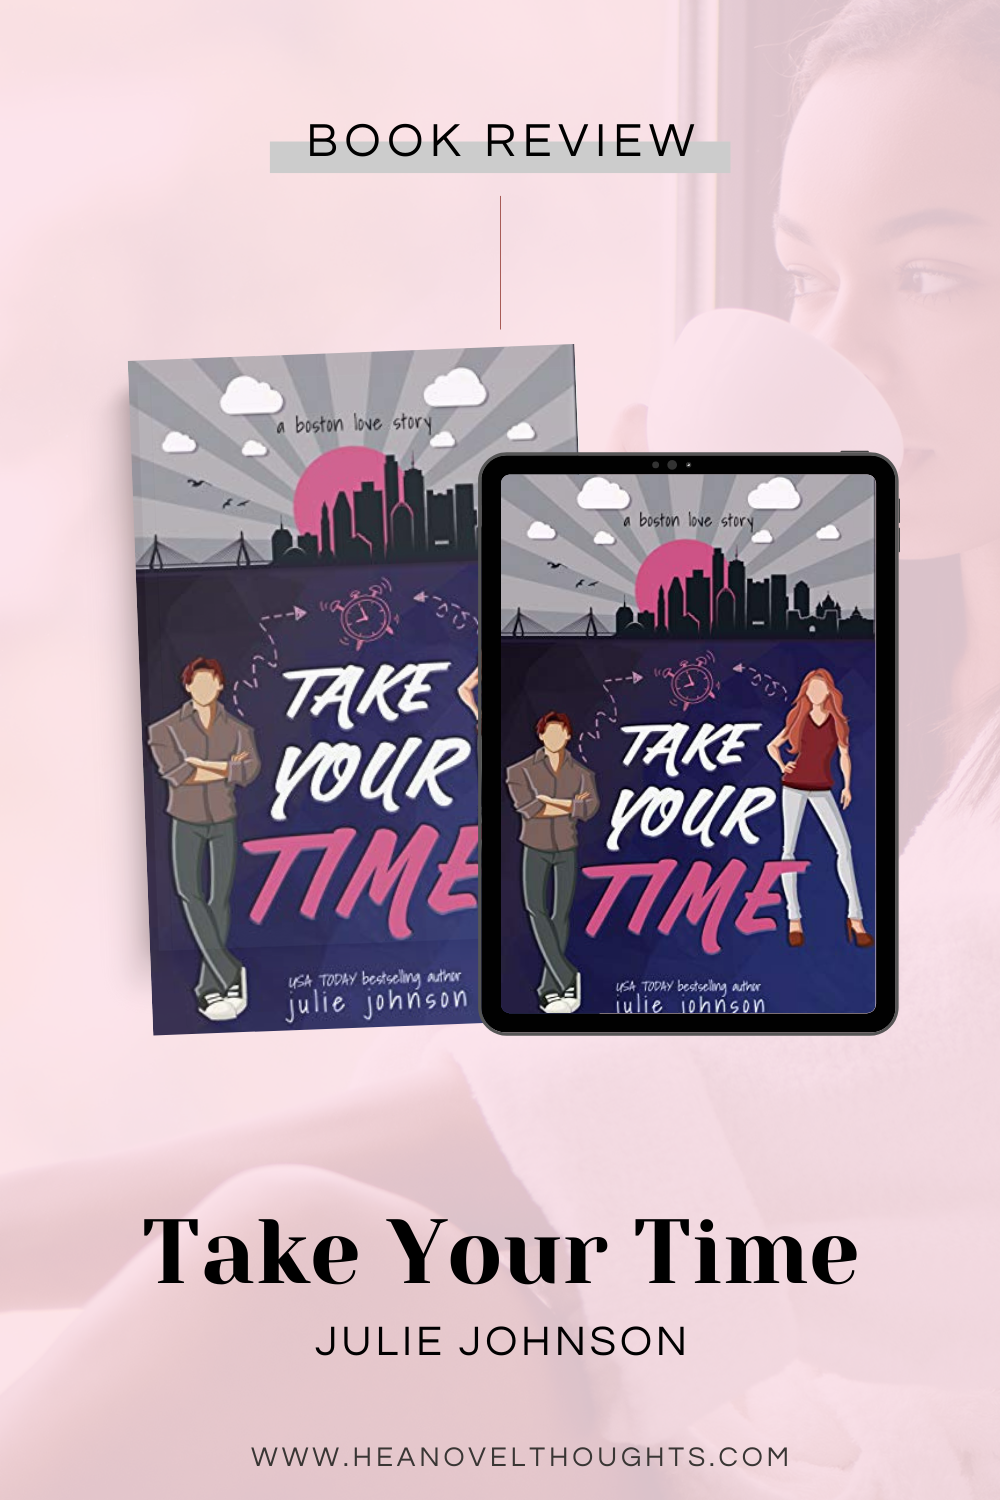 Take Your Time by Julie Johnson